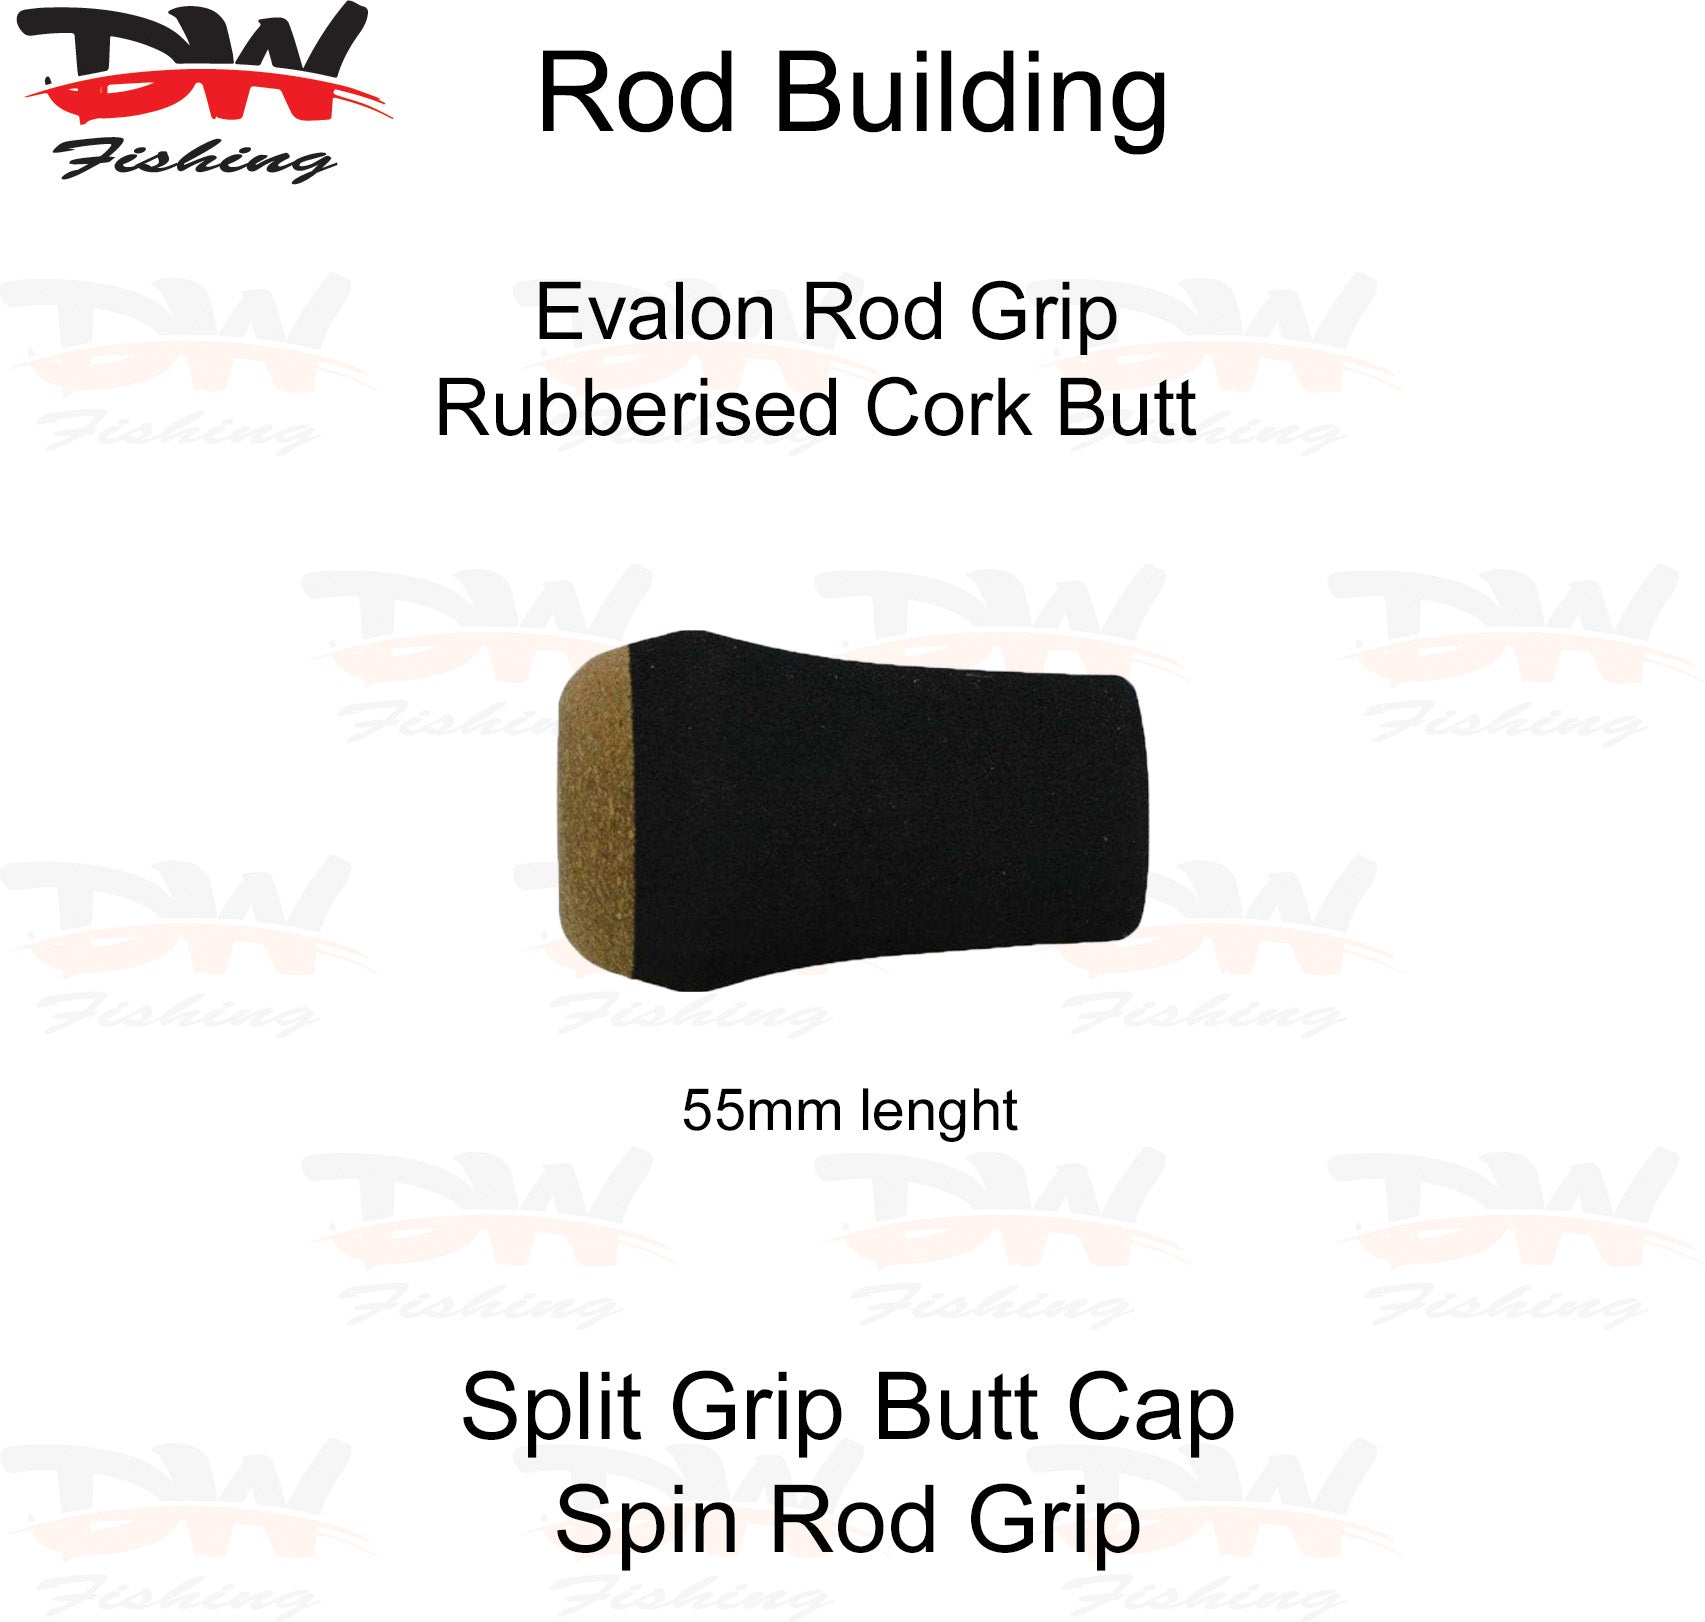 EVA foam spin grip with rubberised cork butt plate- EVA butt cap picture of 55mm rod butts